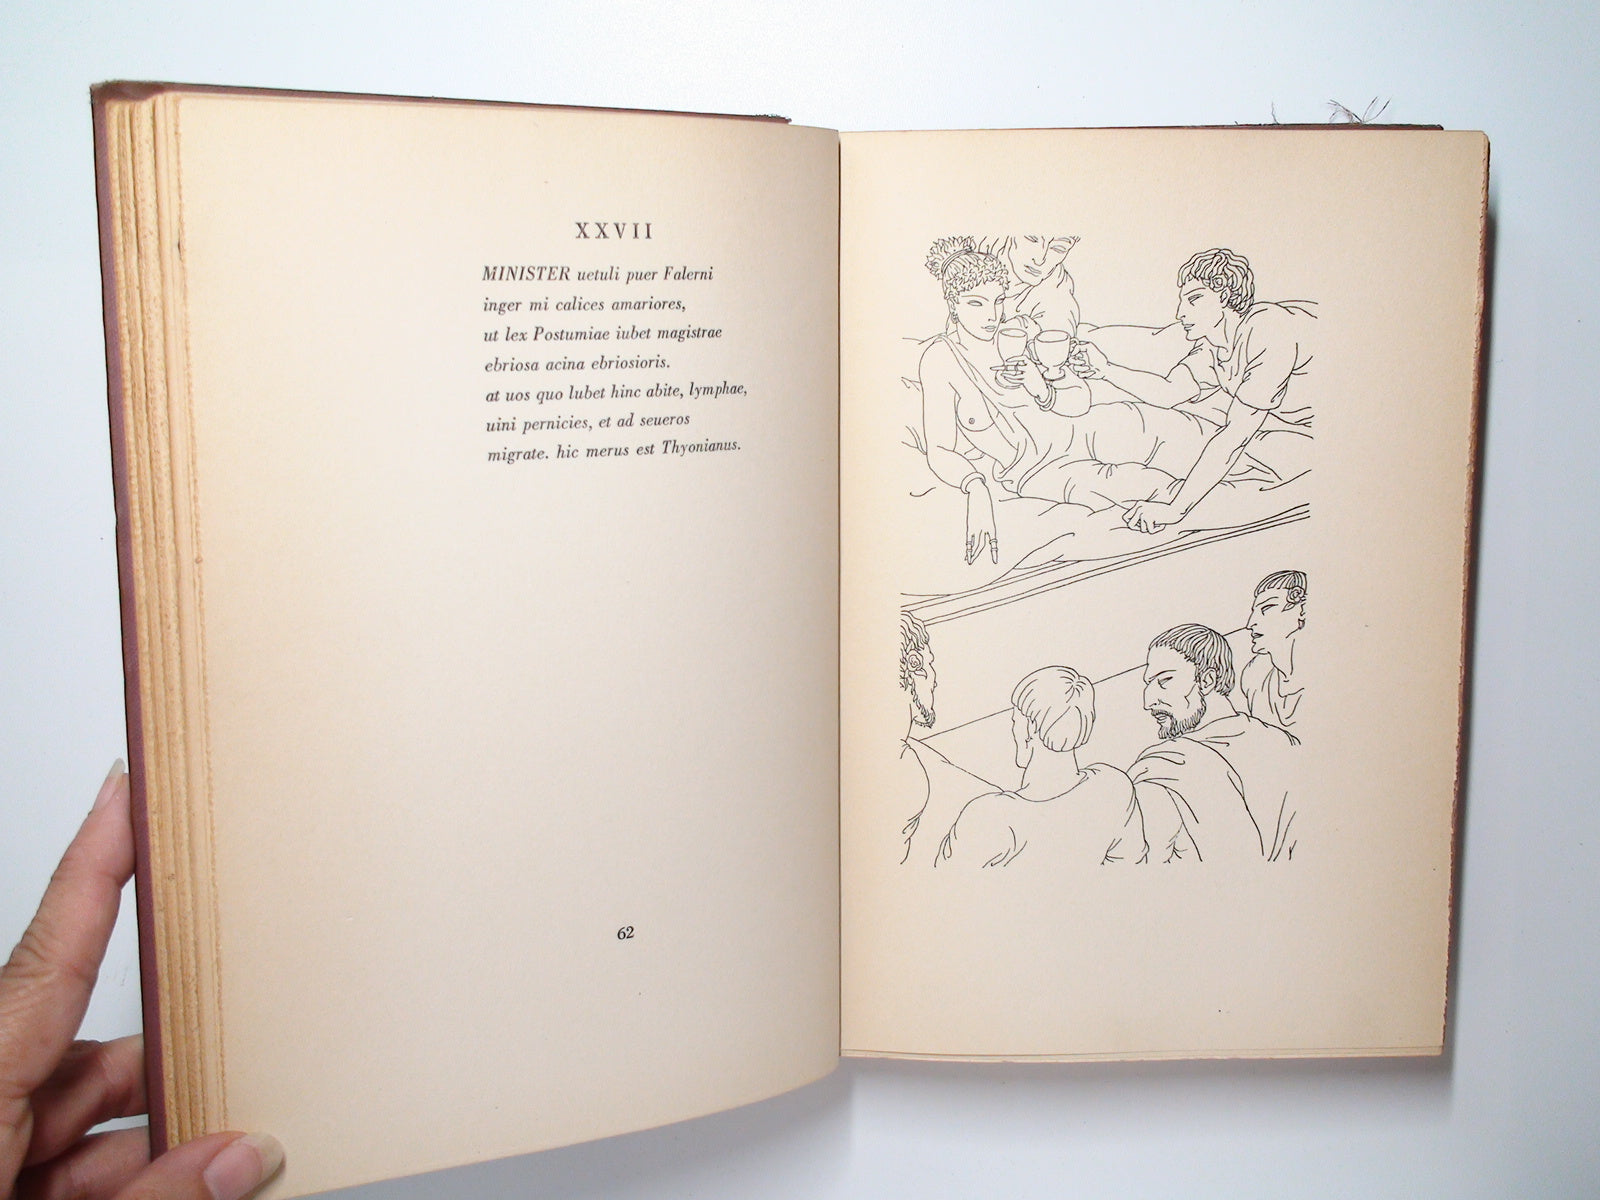 The Poems of Catullus, Translated by Horace Gregory, Illustrated, 1933